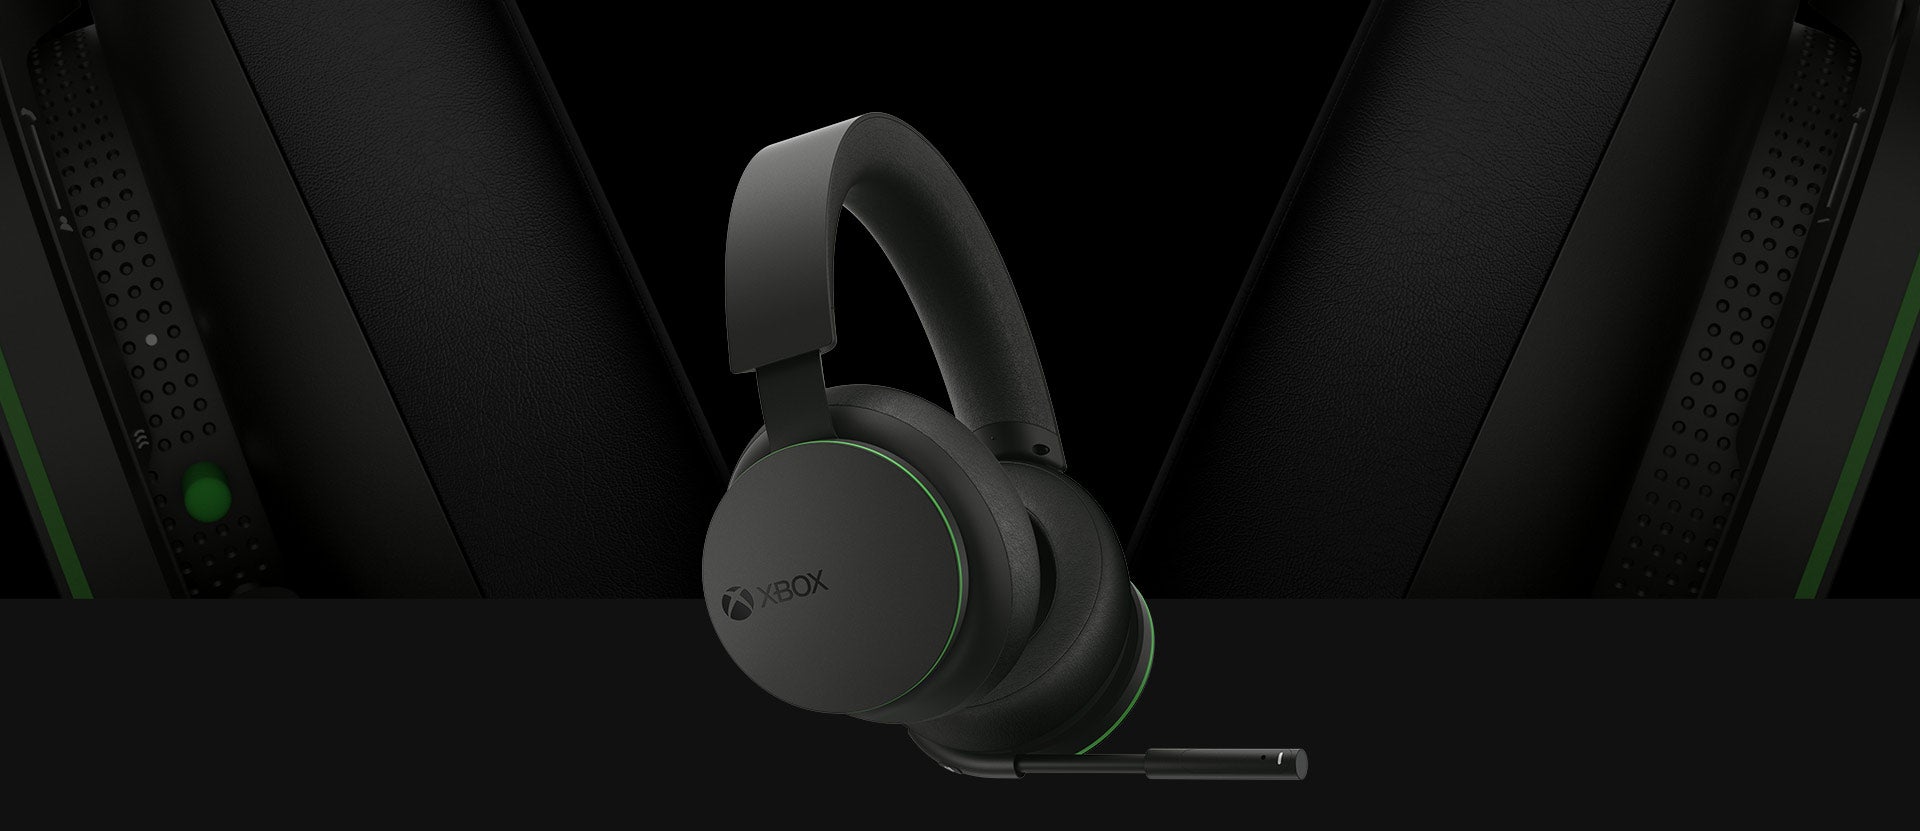 Image for The new official Xbox Wireless Headset is a best-in-class offering for the price